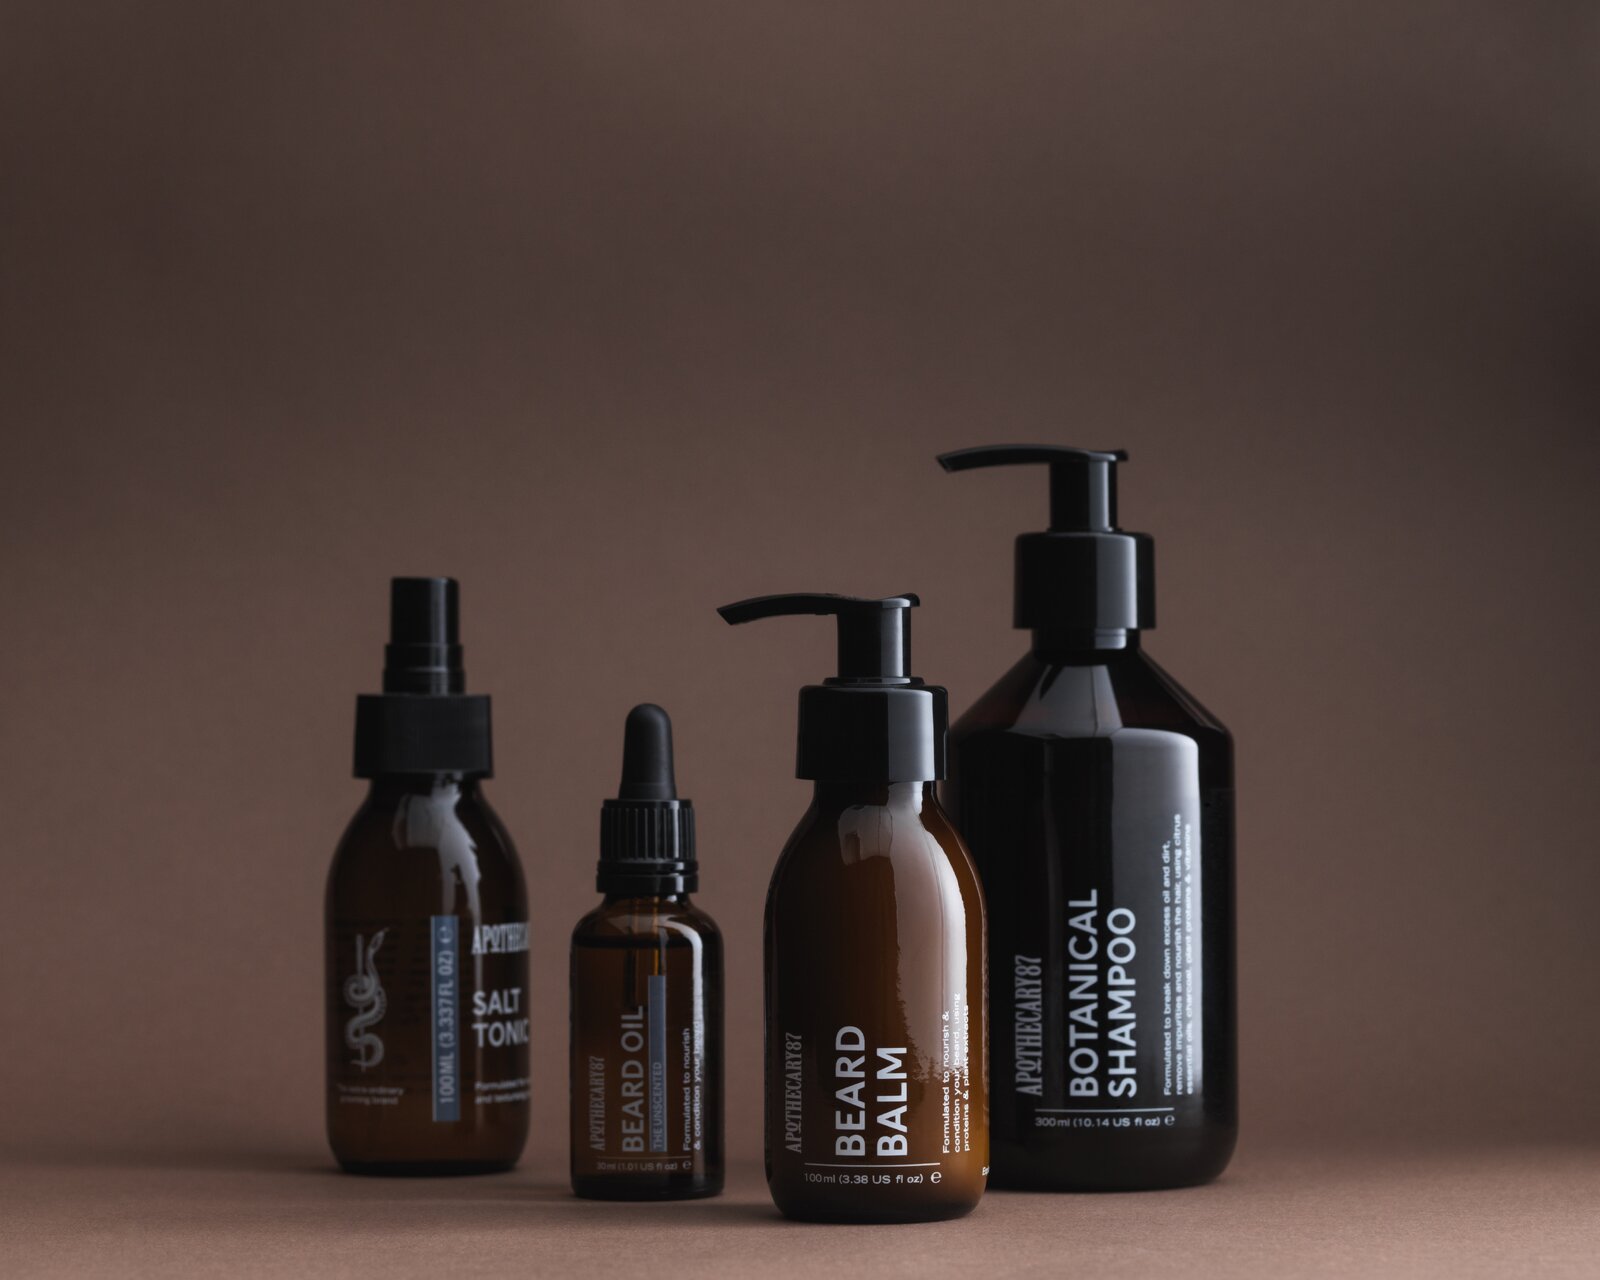 Elevating your brand and customer experience through considered product photography